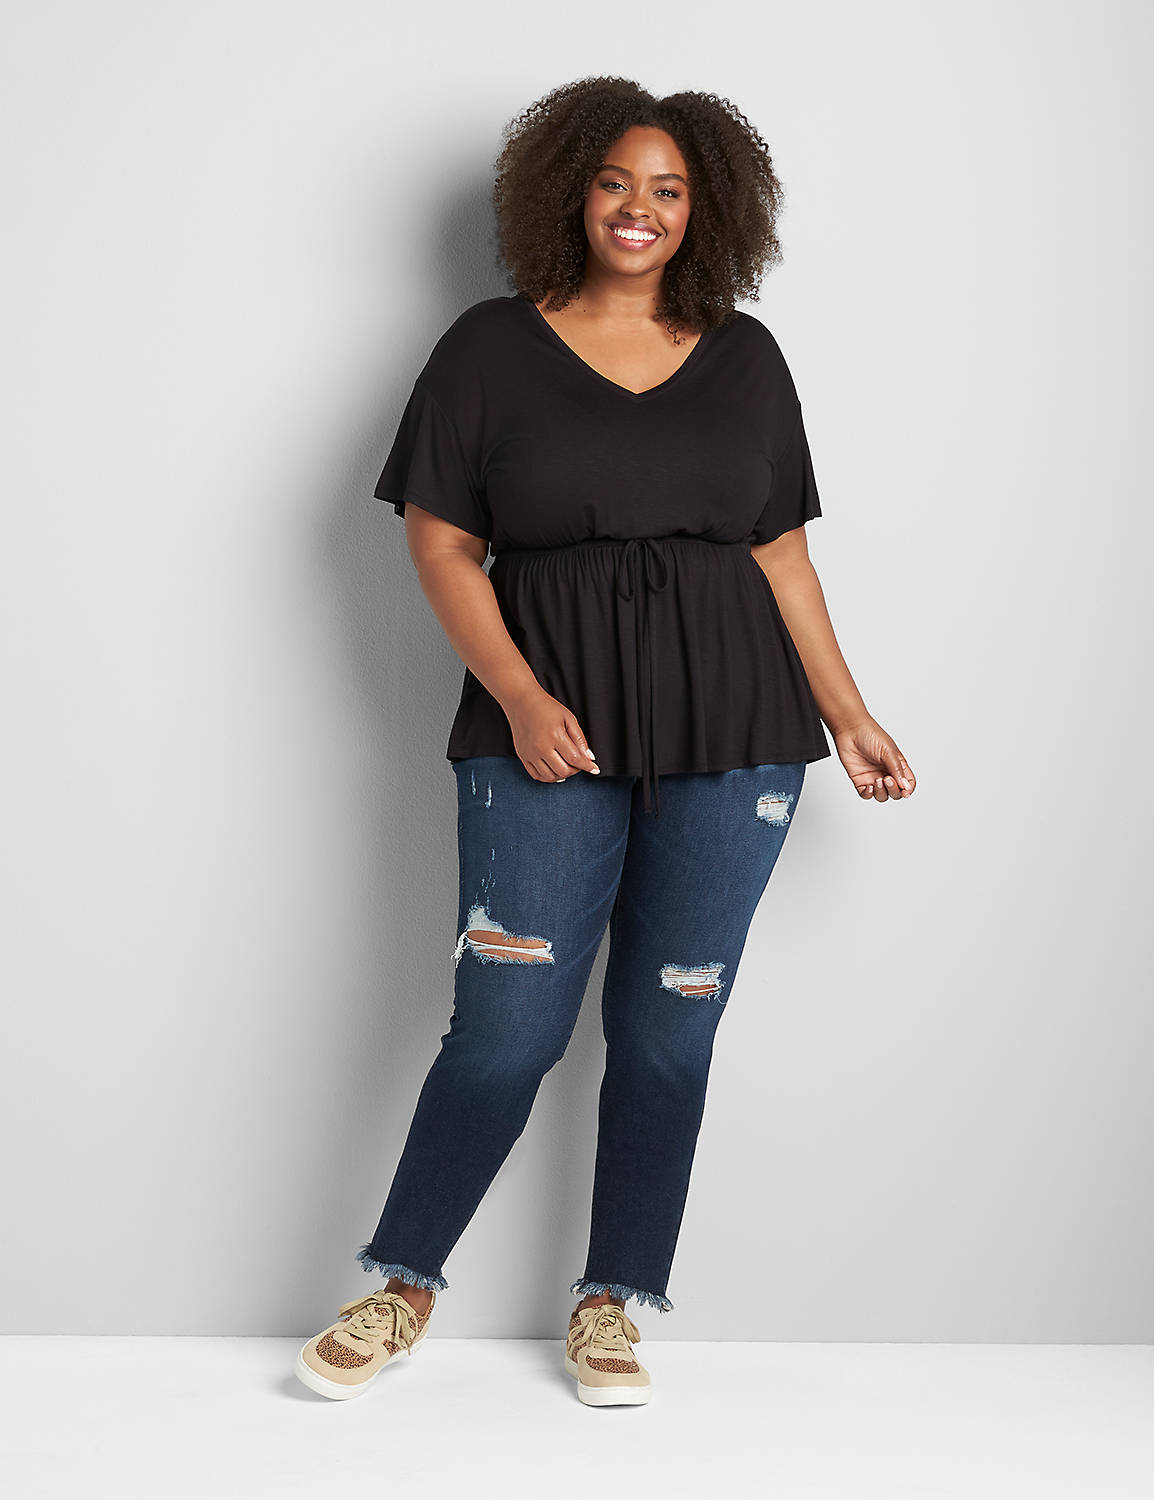 Curvy Fit High-Rise Skinny Jean Product Image 3